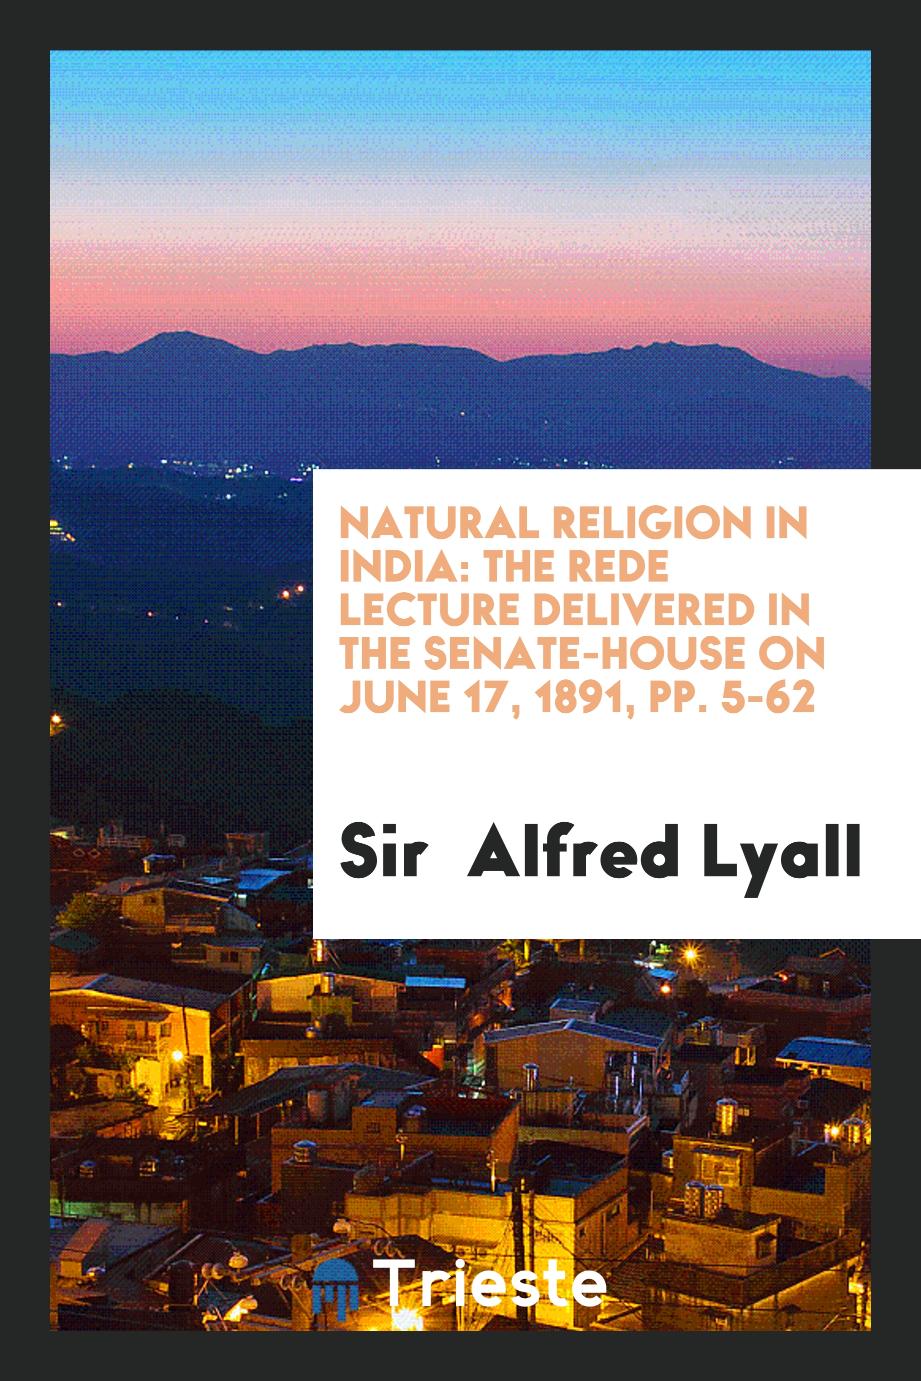 Natural Religion in India: The Rede Lecture Delivered in the Senate-house on June 17, 1891, pp. 5-62